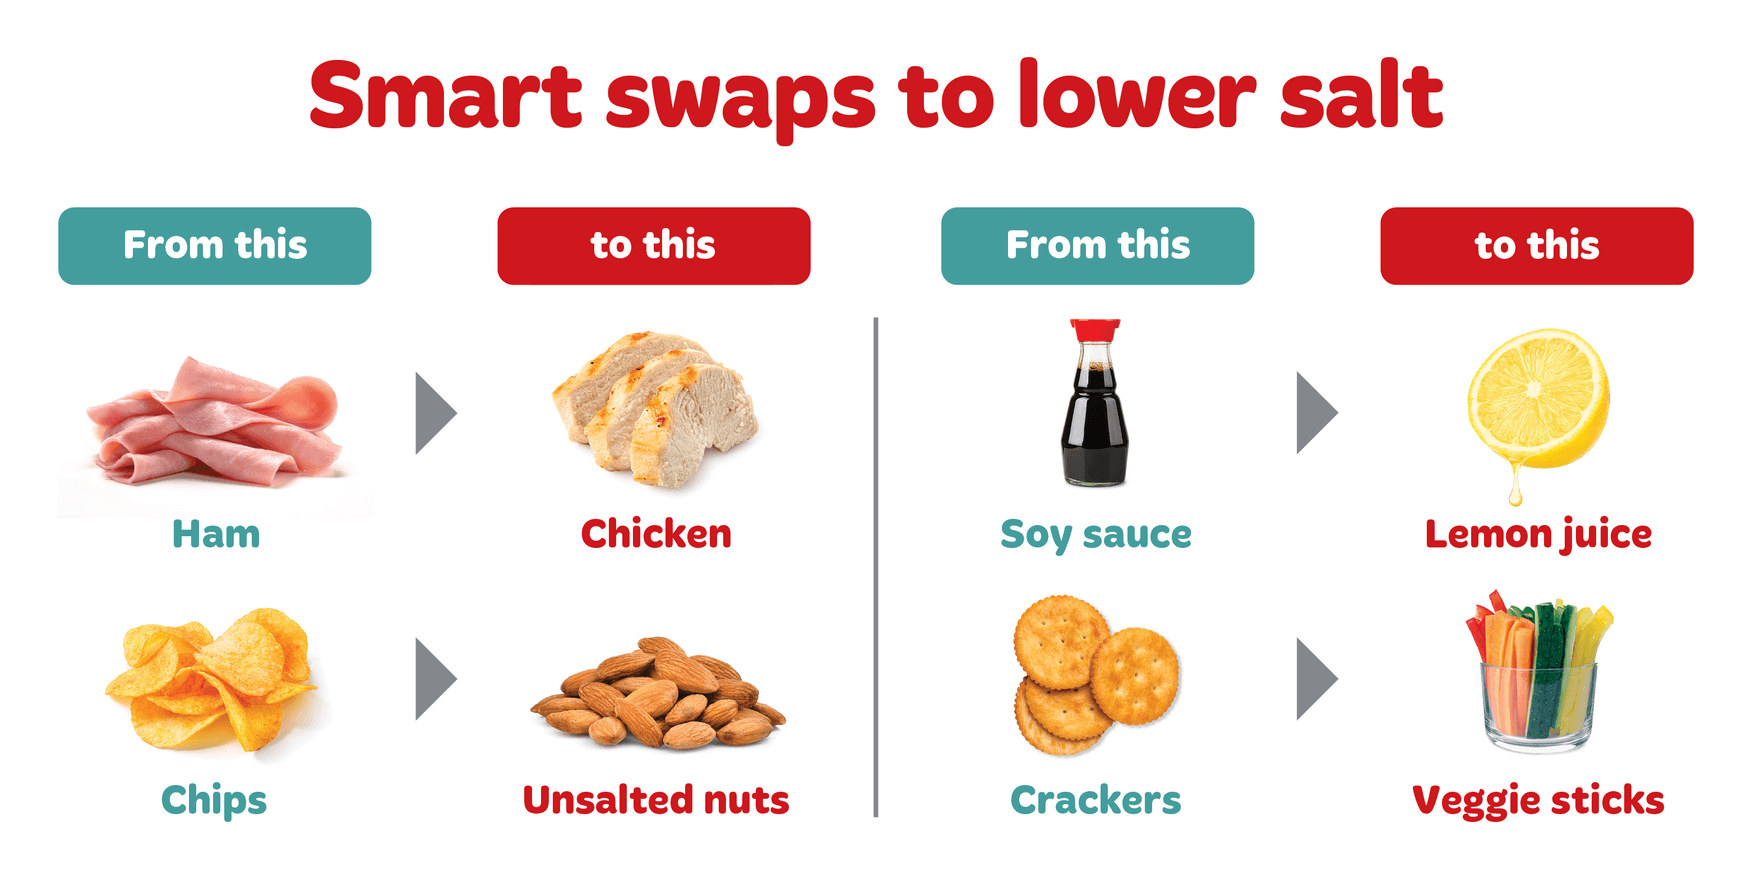 Smart swaps to lower salt - ham to chicken, chips to unsalted nuts, soy sauce to lemon juice, crackers to veggies sticks